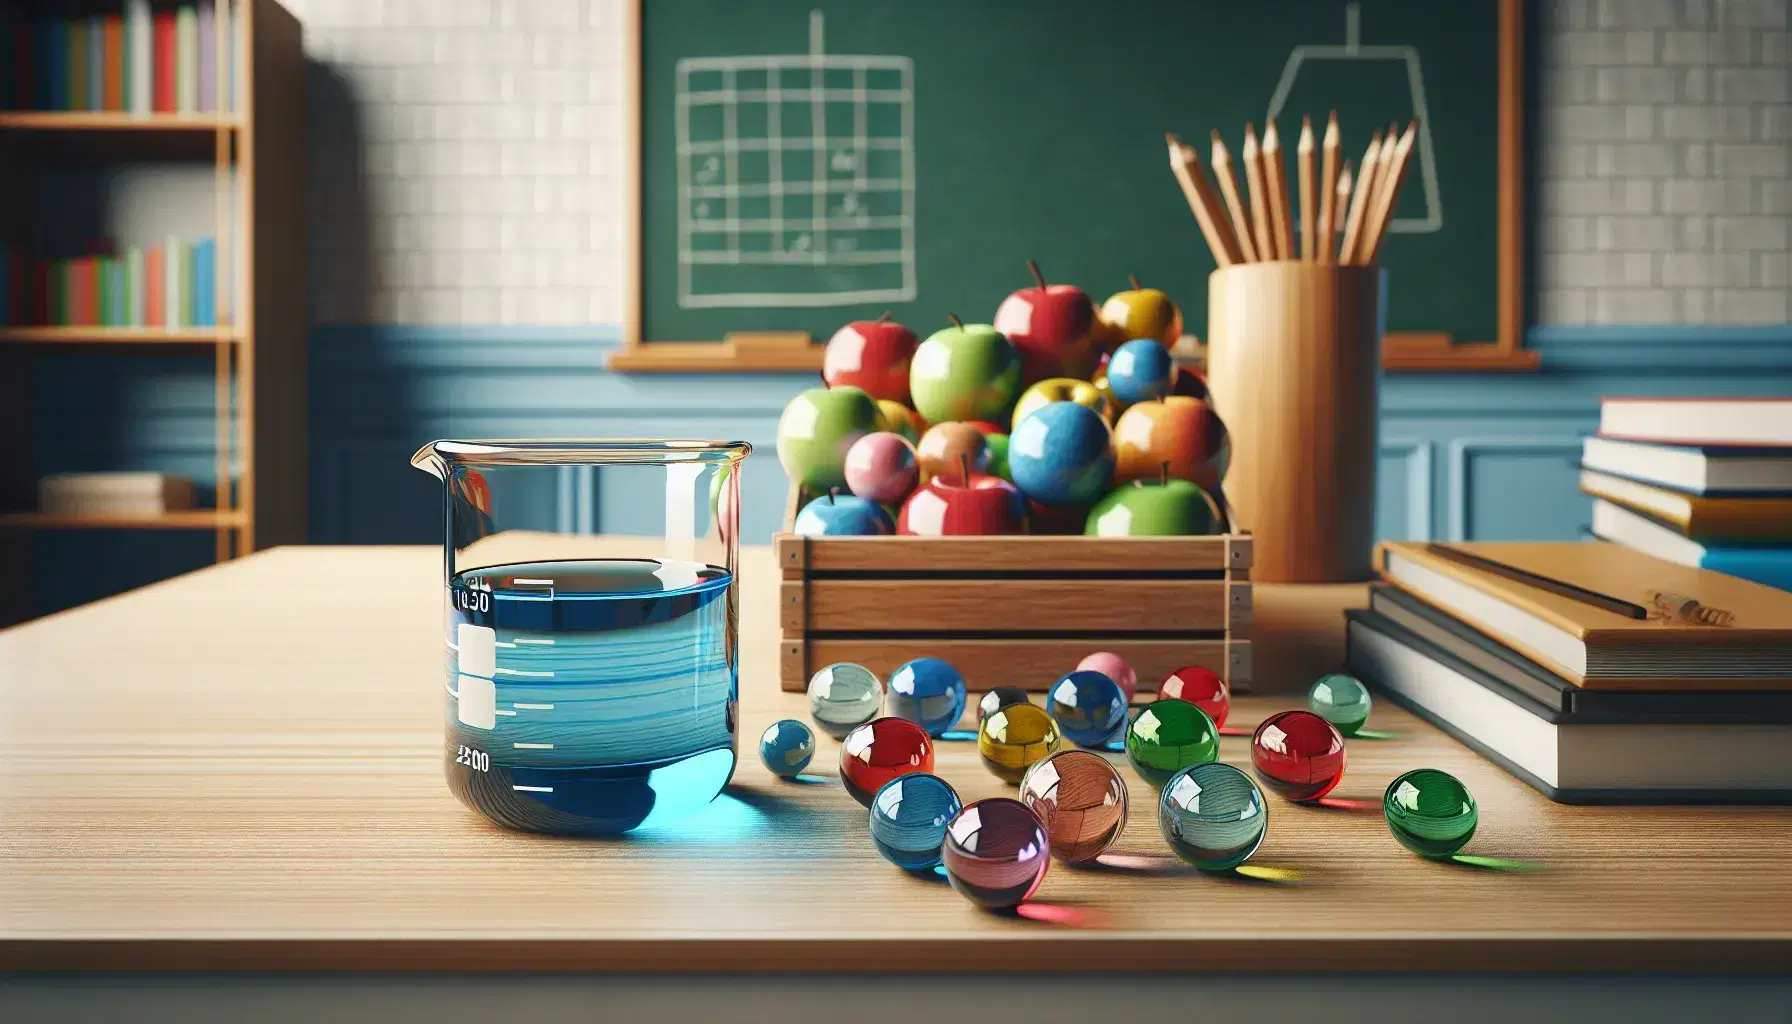 Tidy classroom desk with glass beaker containing blue liquid, scattered colorful marbles and basket of assorted fruits on clean blackboard background.